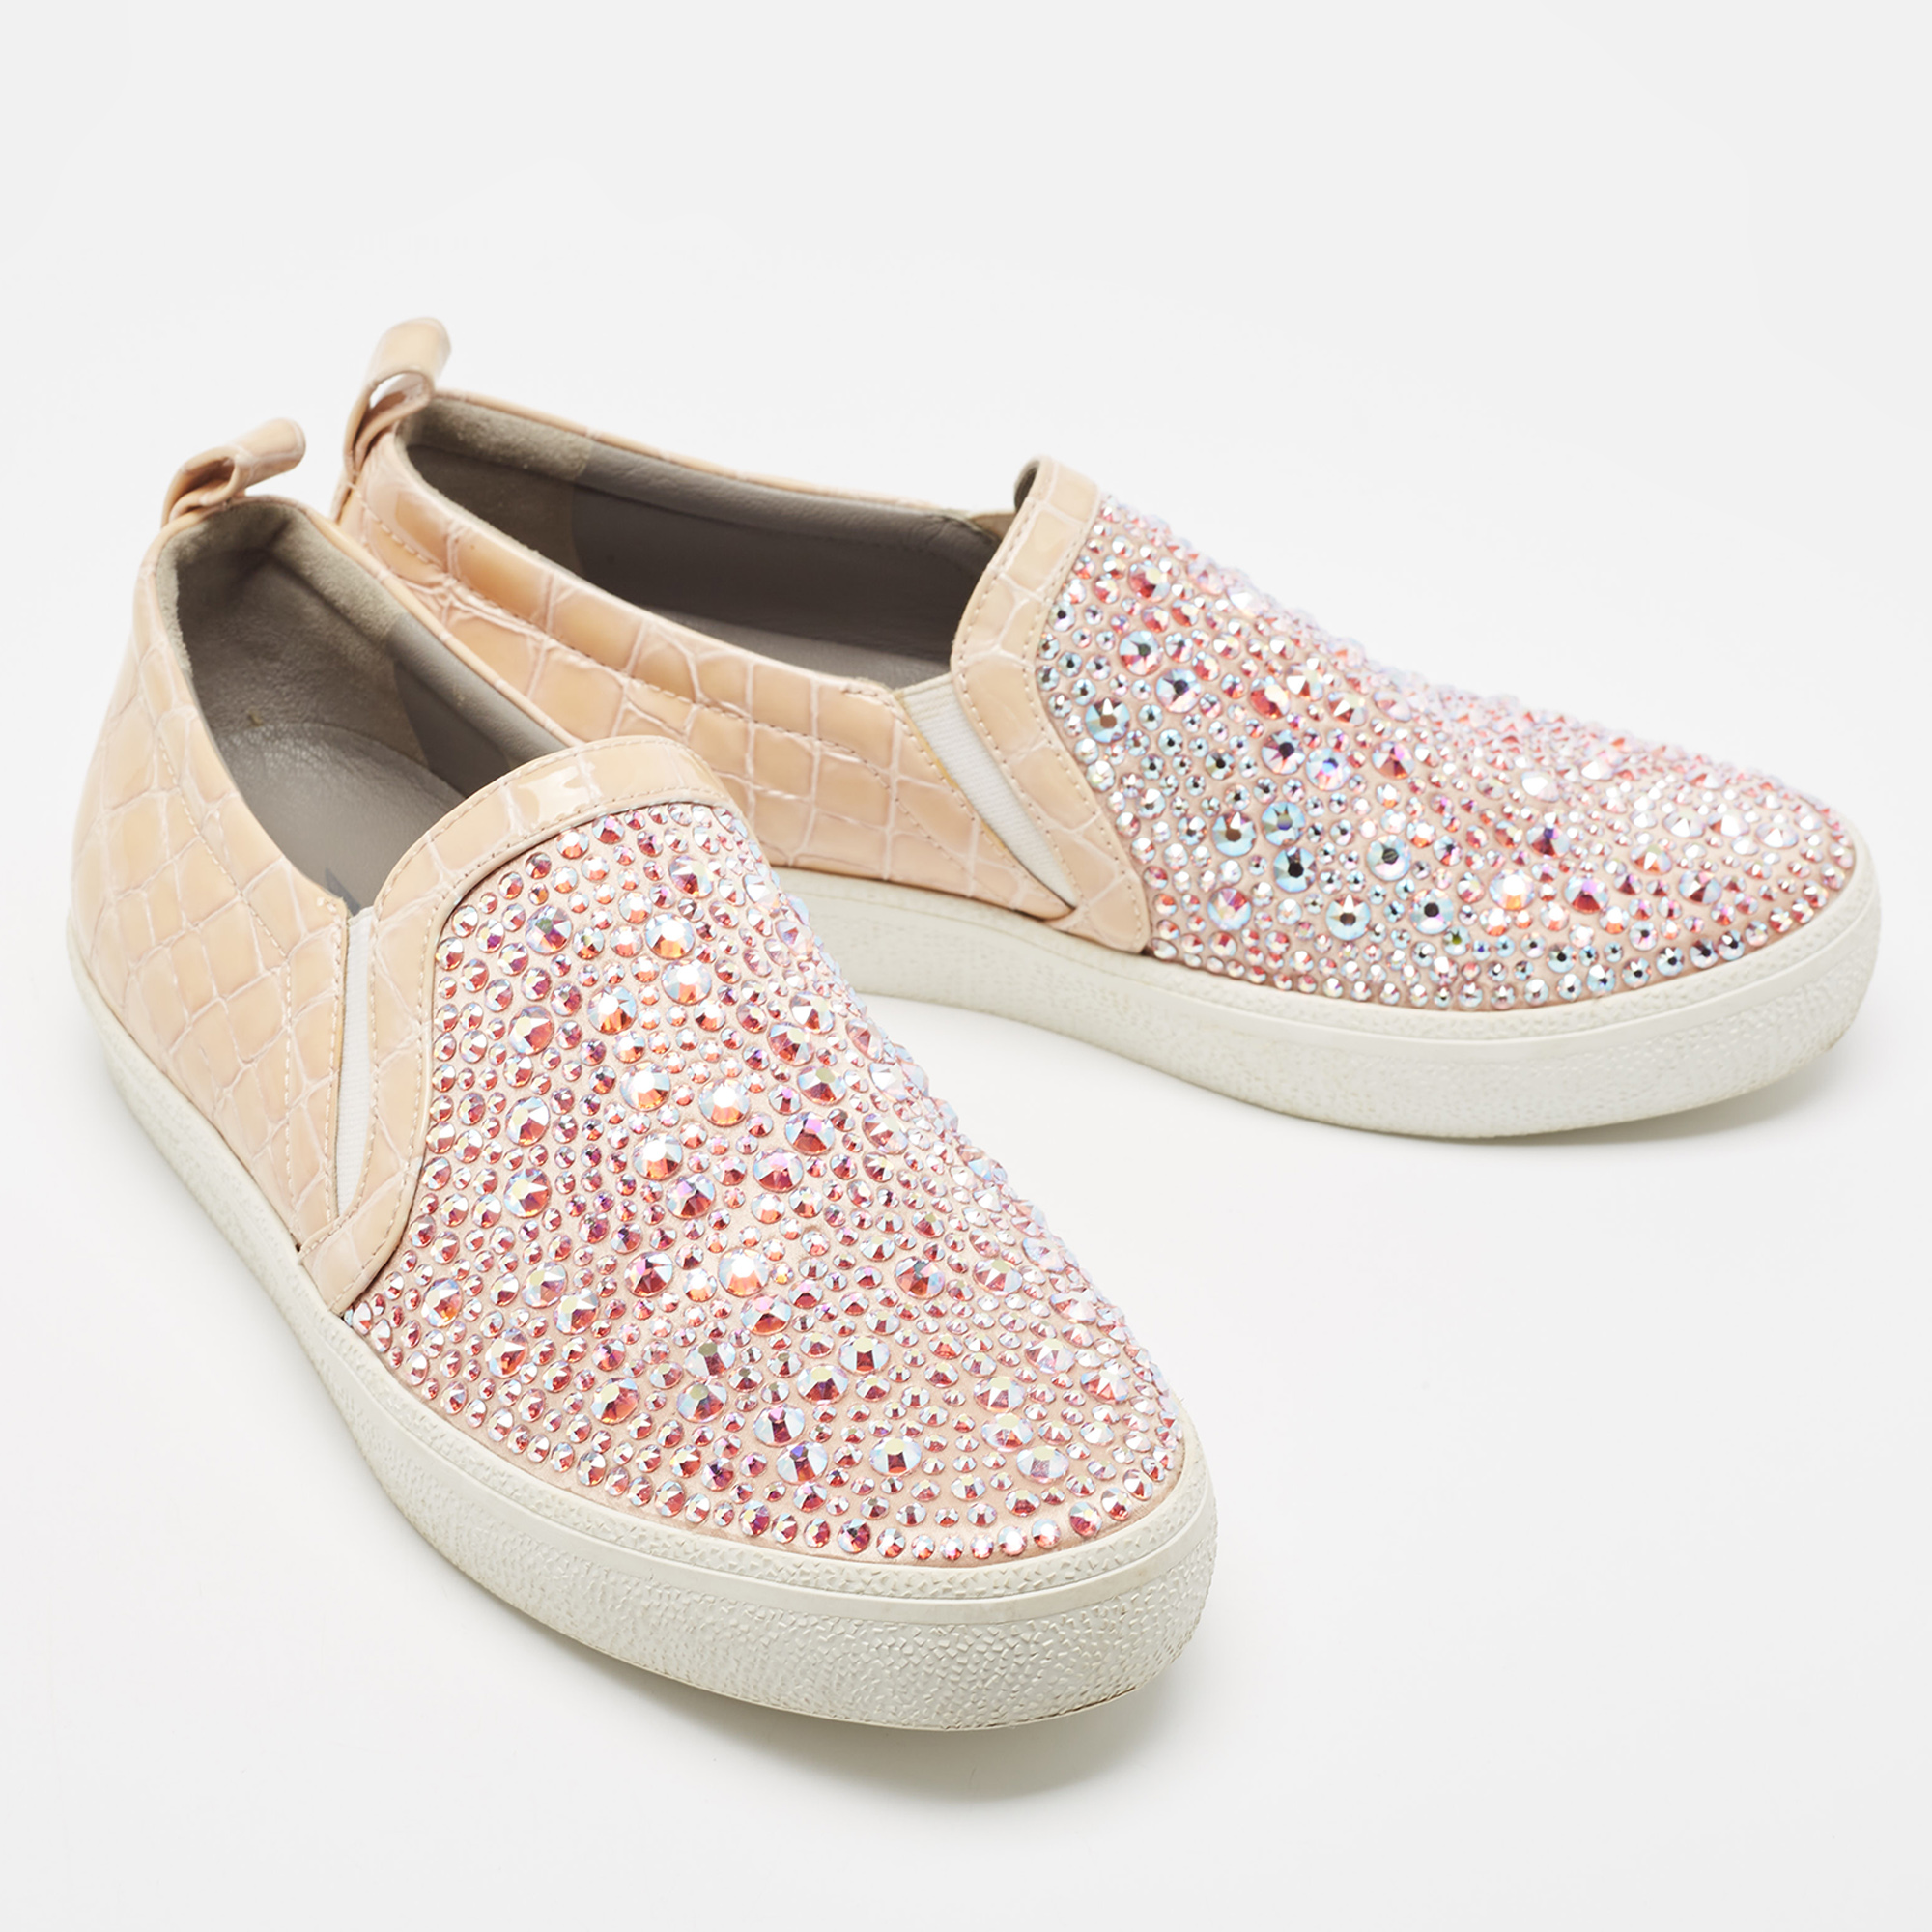 Gina Pink/Beige Crystal Embellished Satin And Croc Embossed Leather Slip On Sneakers Size 39